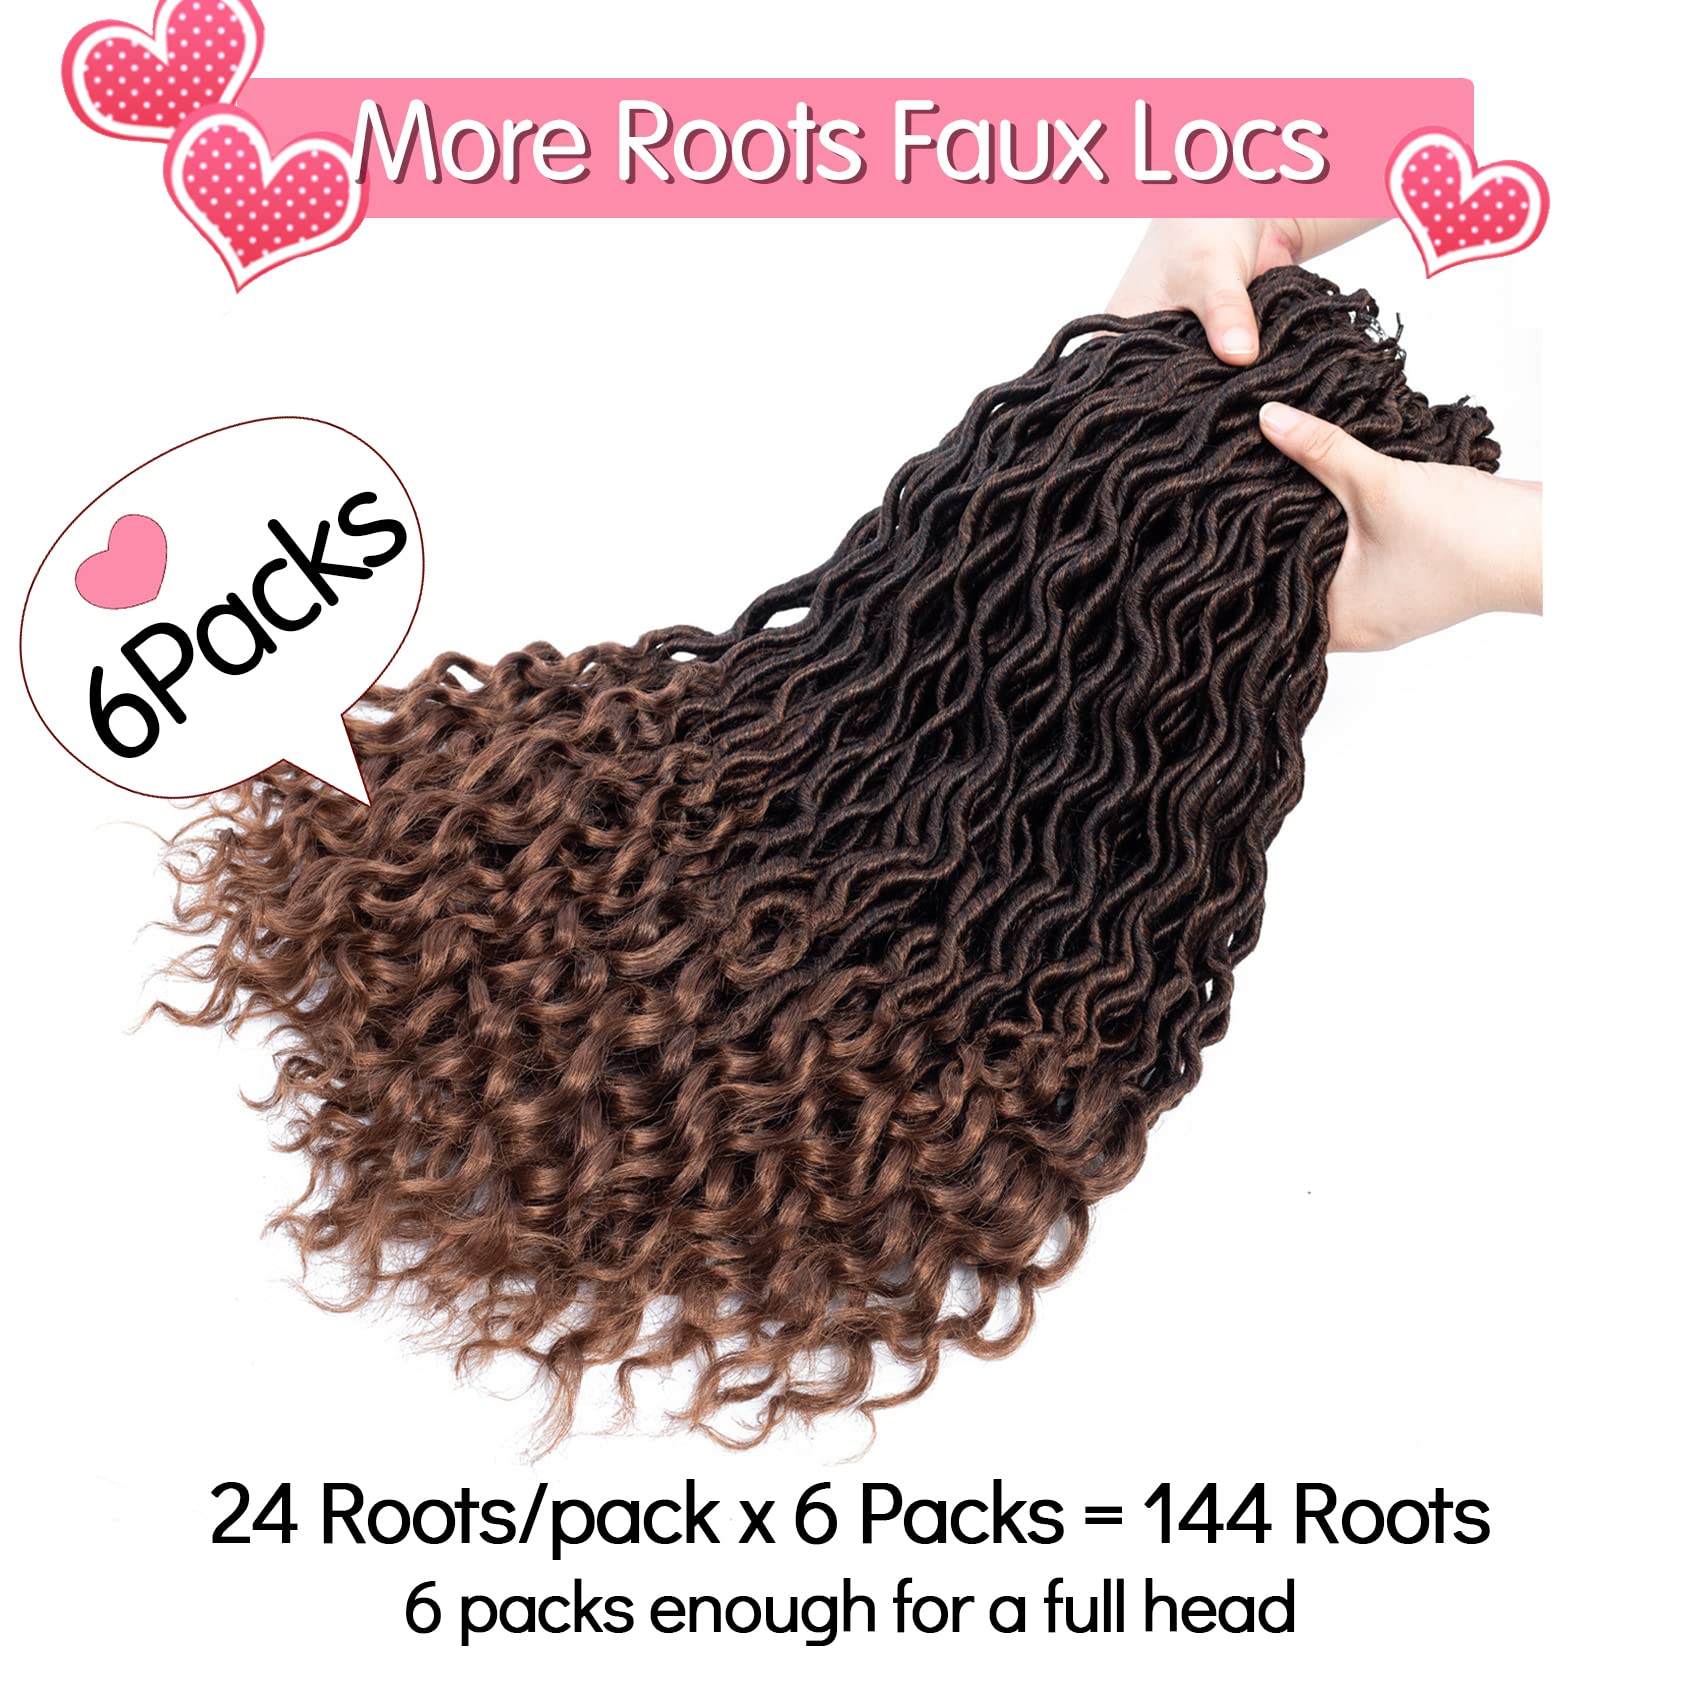 Karida Faux Locs Crochet Hair 6Pcs/Lot Curly Deep Wave Braiding Hair With Curly Ends Crochet Goddess Locs Synthetic Braids Hair Extensions (18 inch, T30#)